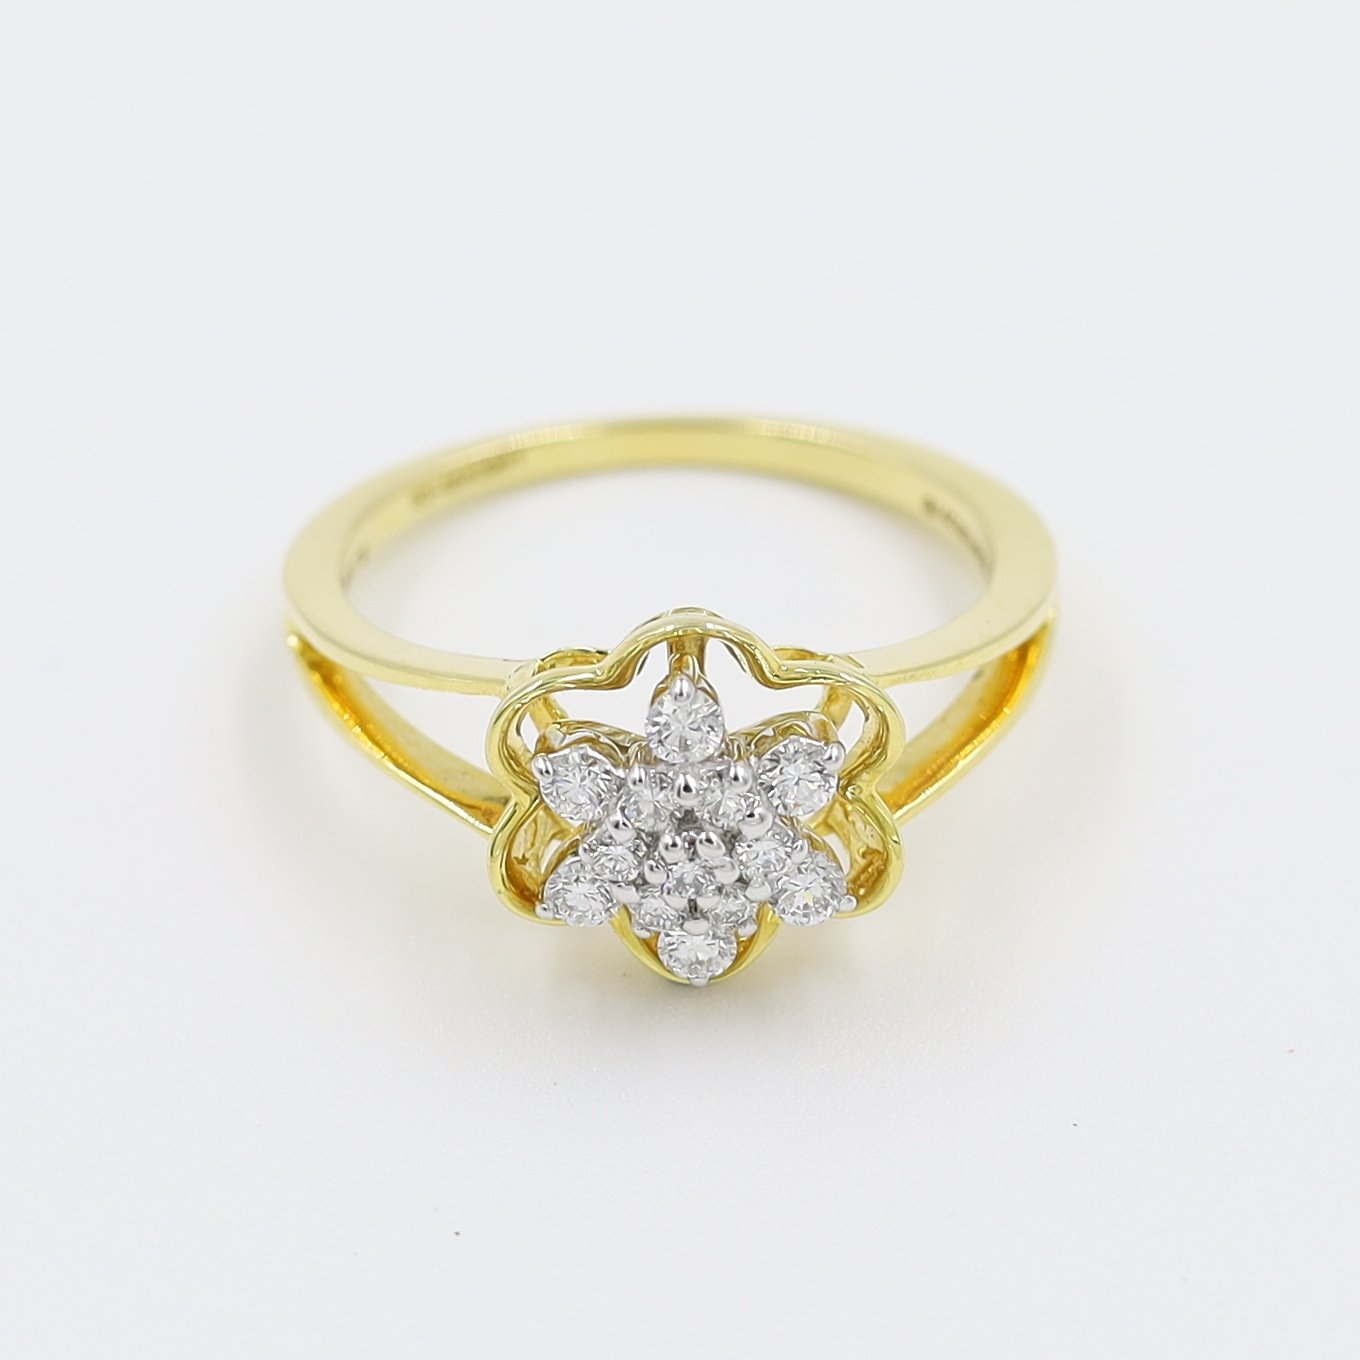 14kt yellow gold stunning flower ring with multipal diamond setting